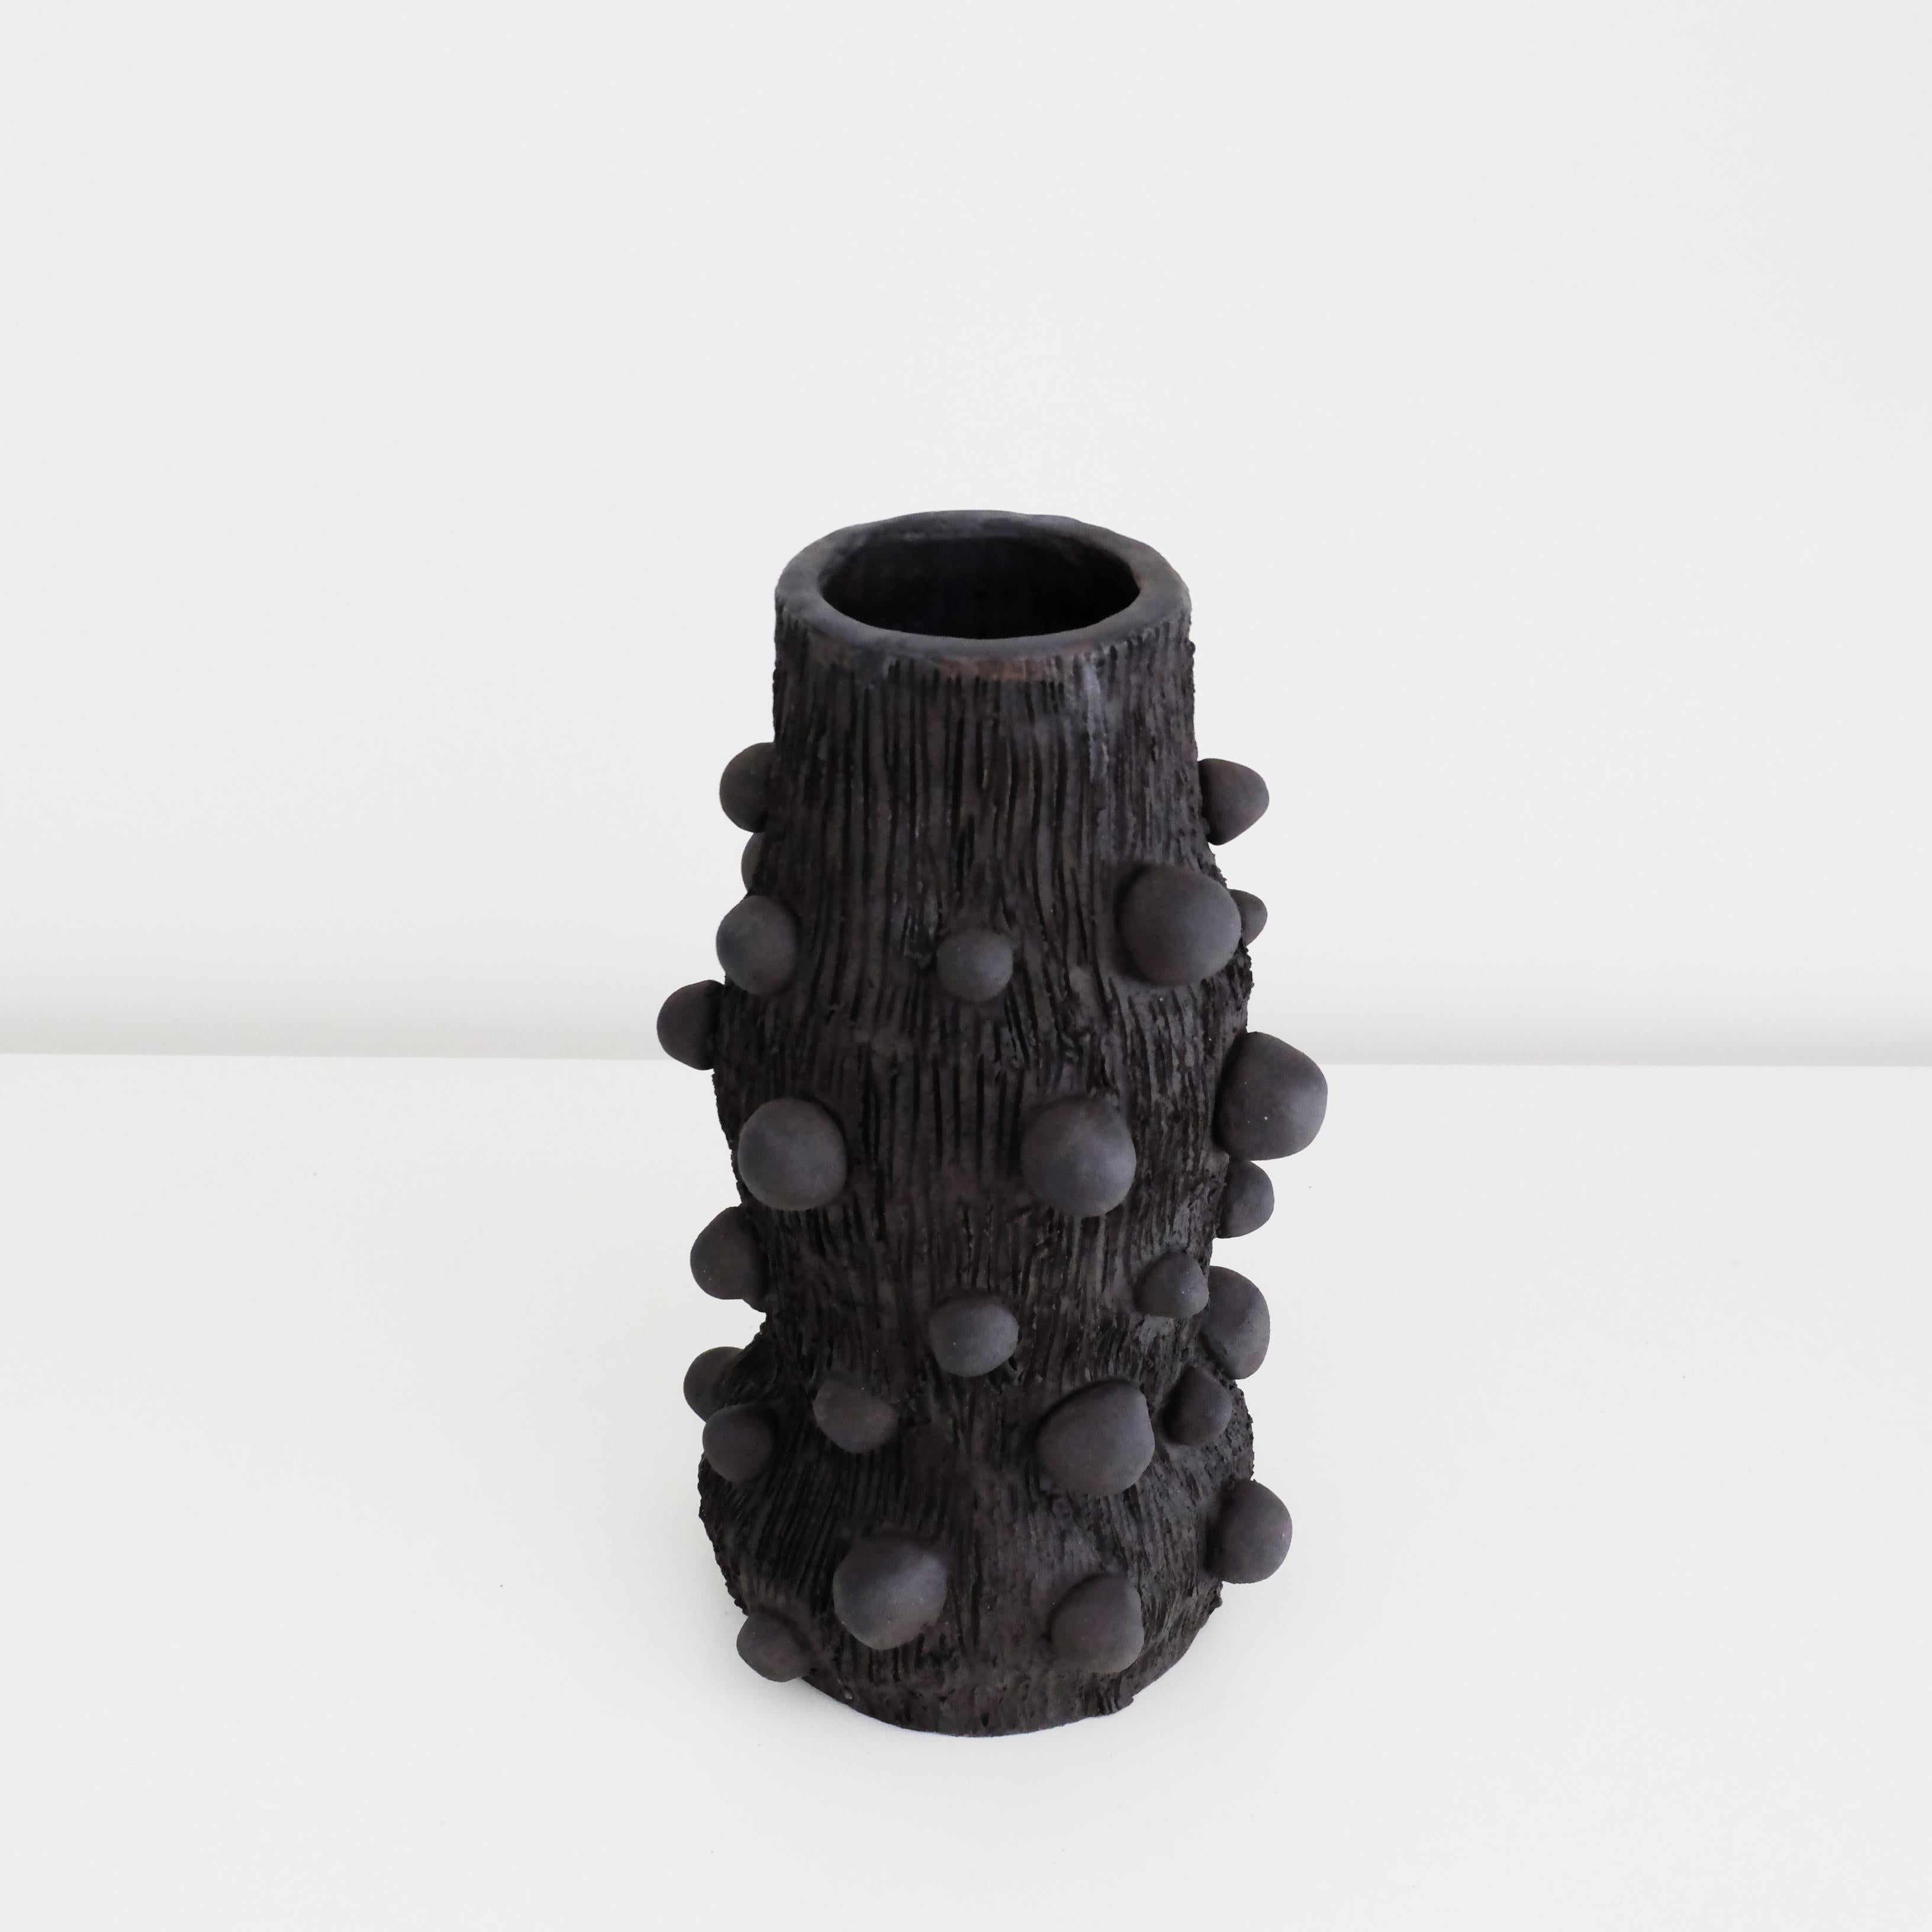 Atom Vase by Ia Kutateladze
One Of A Kind
Dimensions: W 10 x H 21 cm.
Materials: Black clay.

Handbuilt from black clay. Each piece is one of a kind, due to its free hand-building process. Please contact us. 

Atom is a vase with an unique